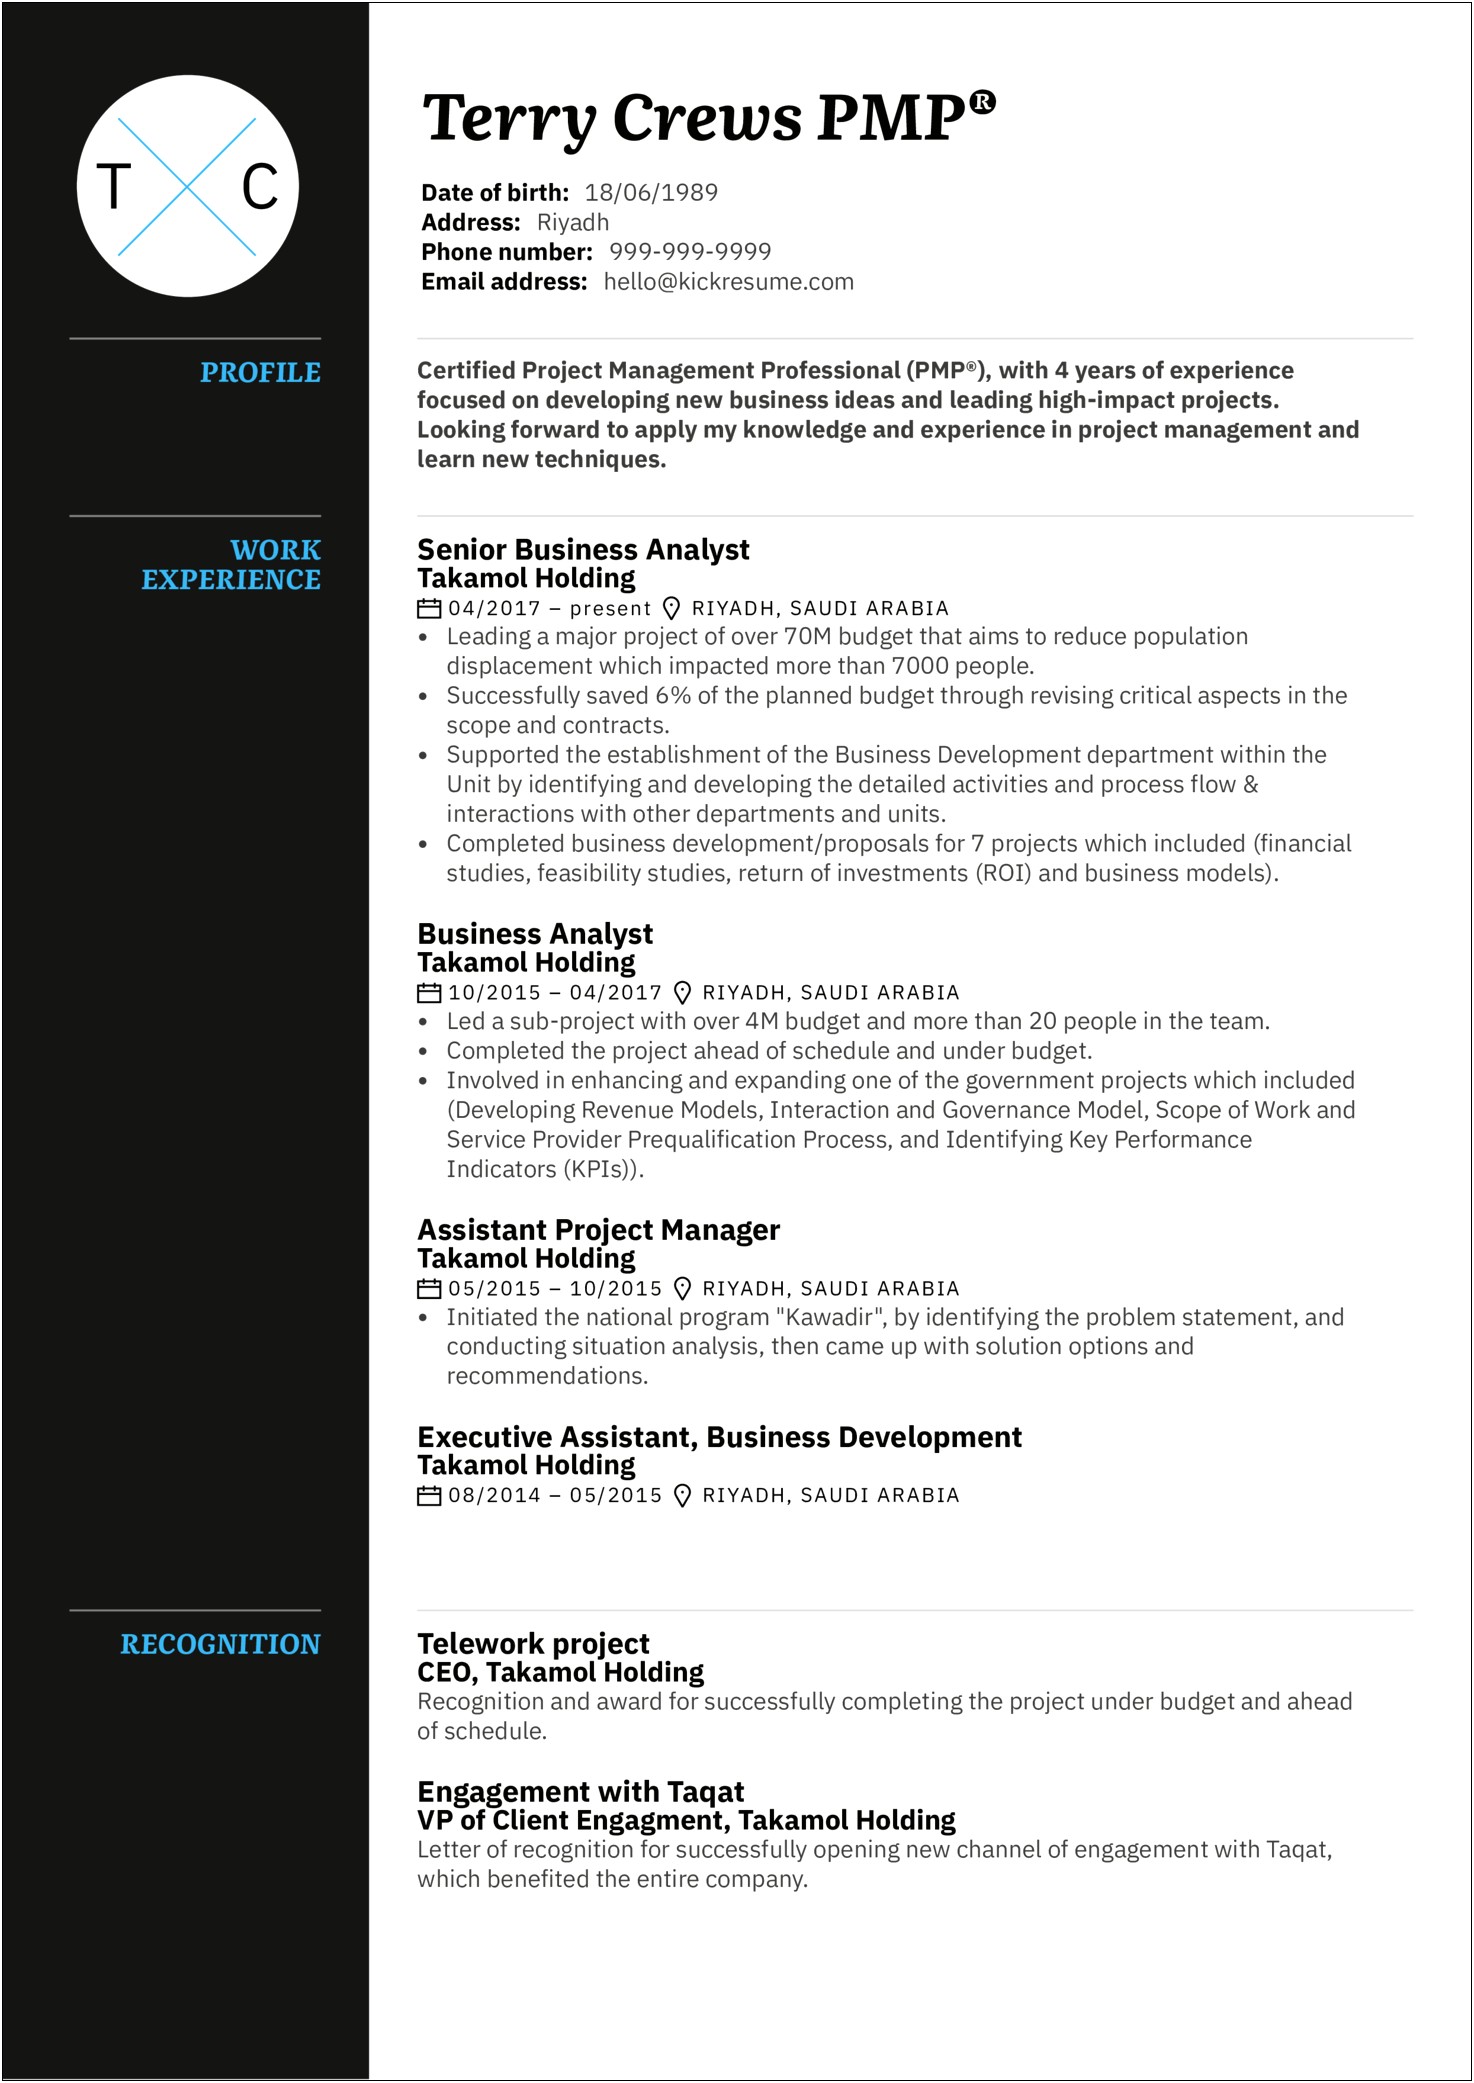 Resume Professional Summary For Managers